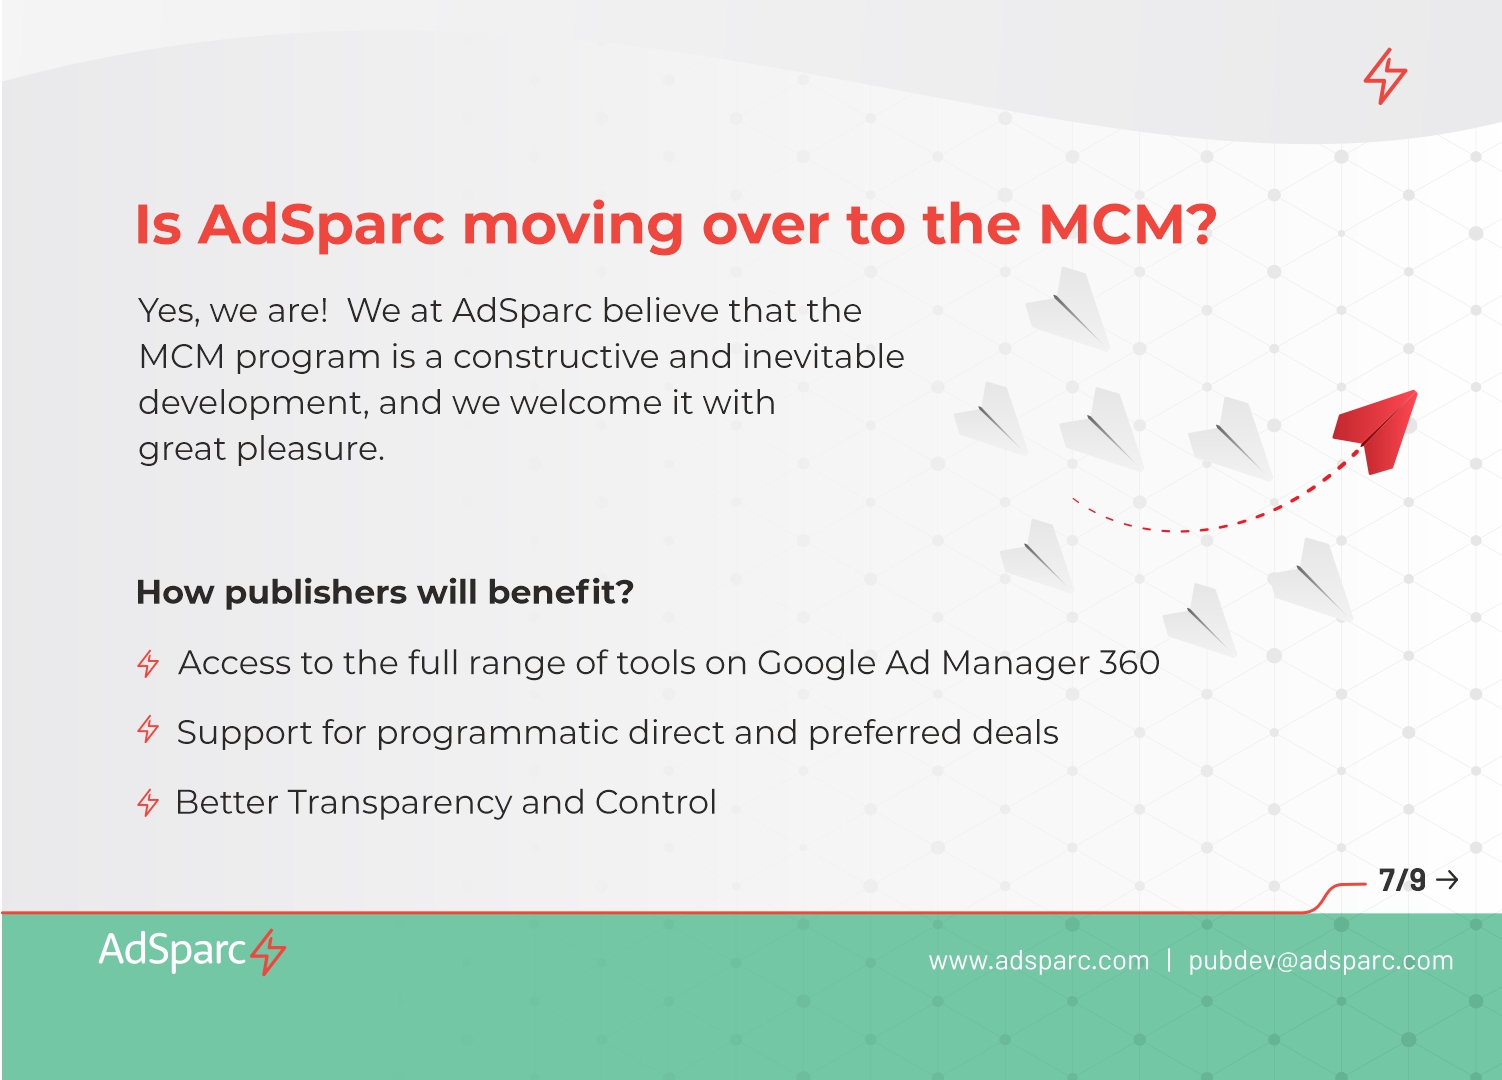 adsparc moving to mcm